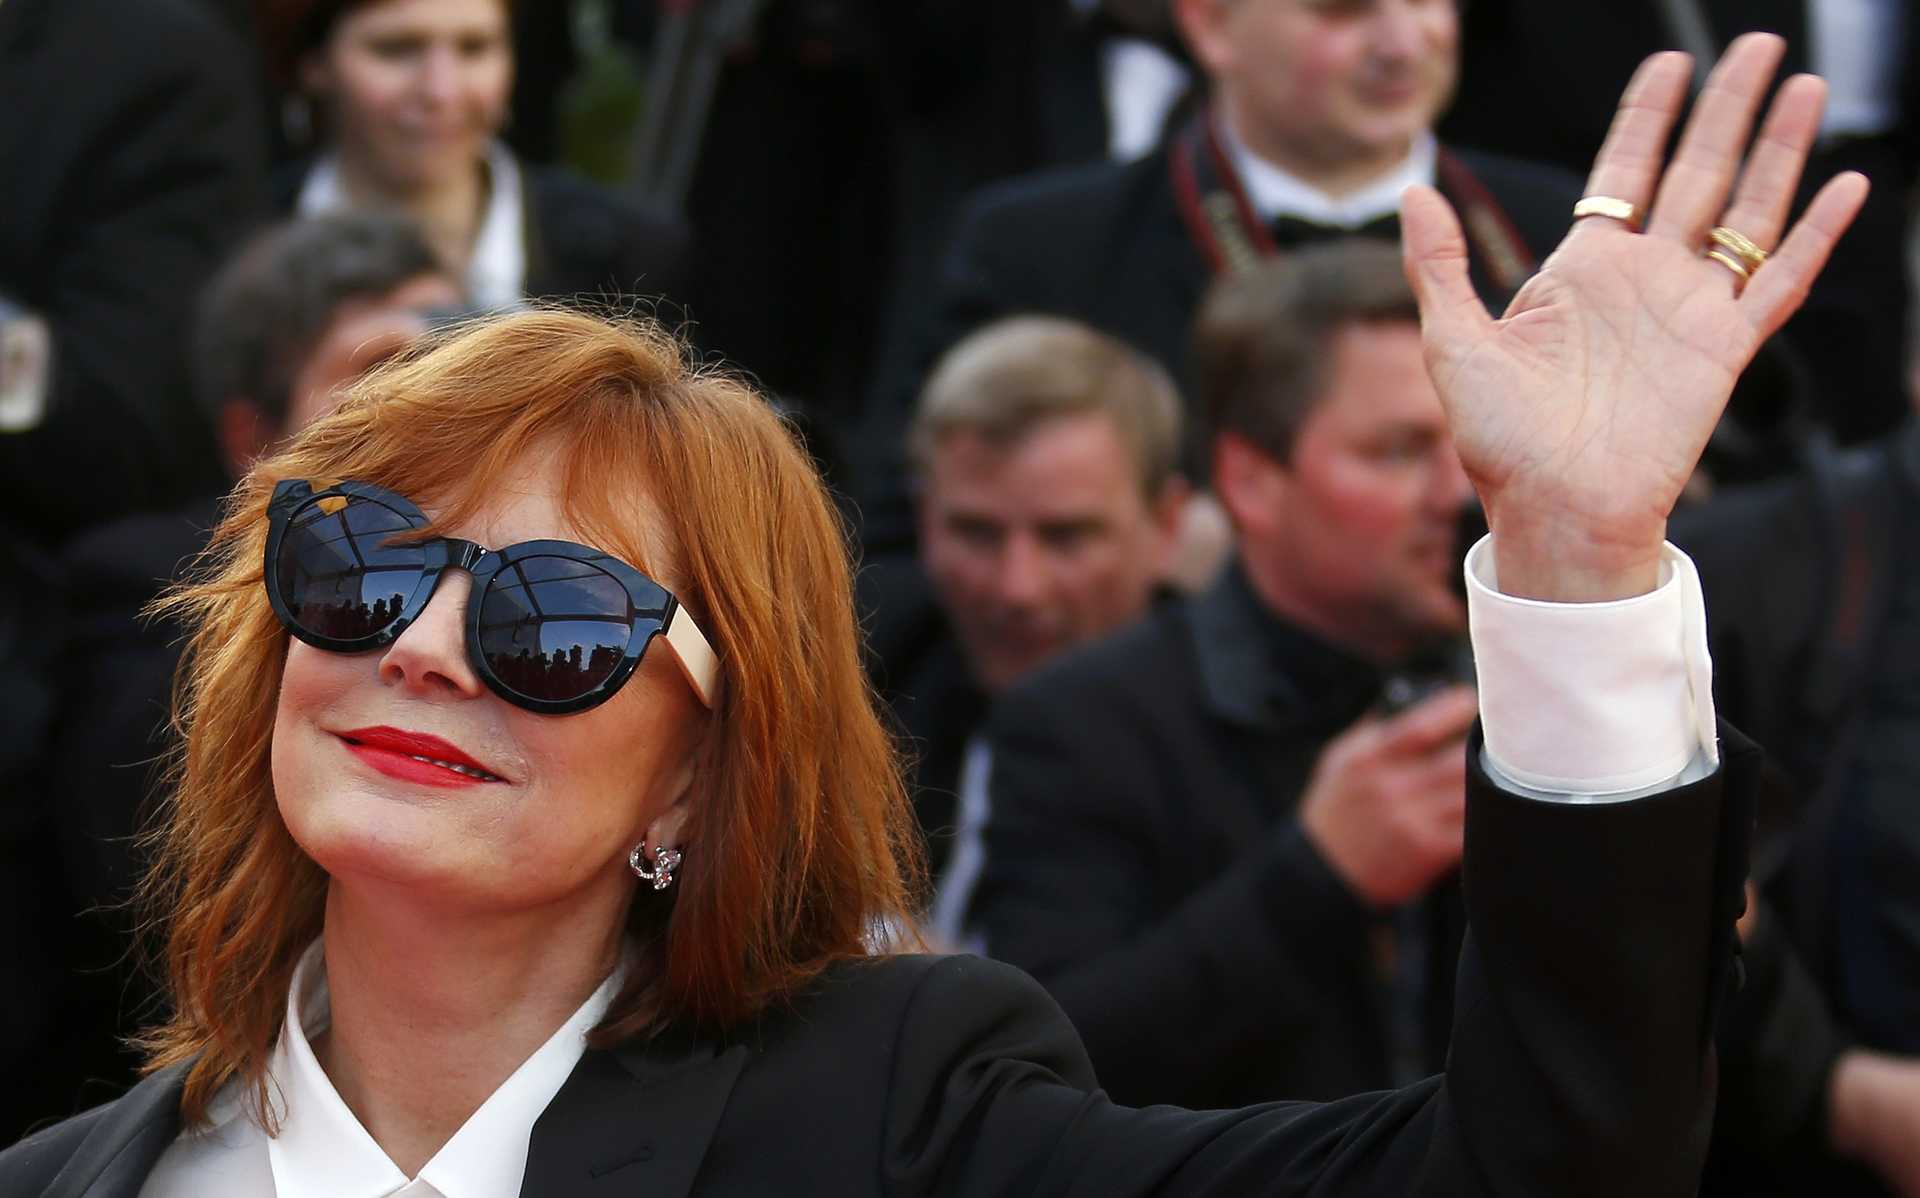 Actress Susan Sarandon poses on the red carpet as she arrives for the opening ceremony and the screening of the film “Cafe Society” out of competition during the 69th Cannes Film Festival in Cannes